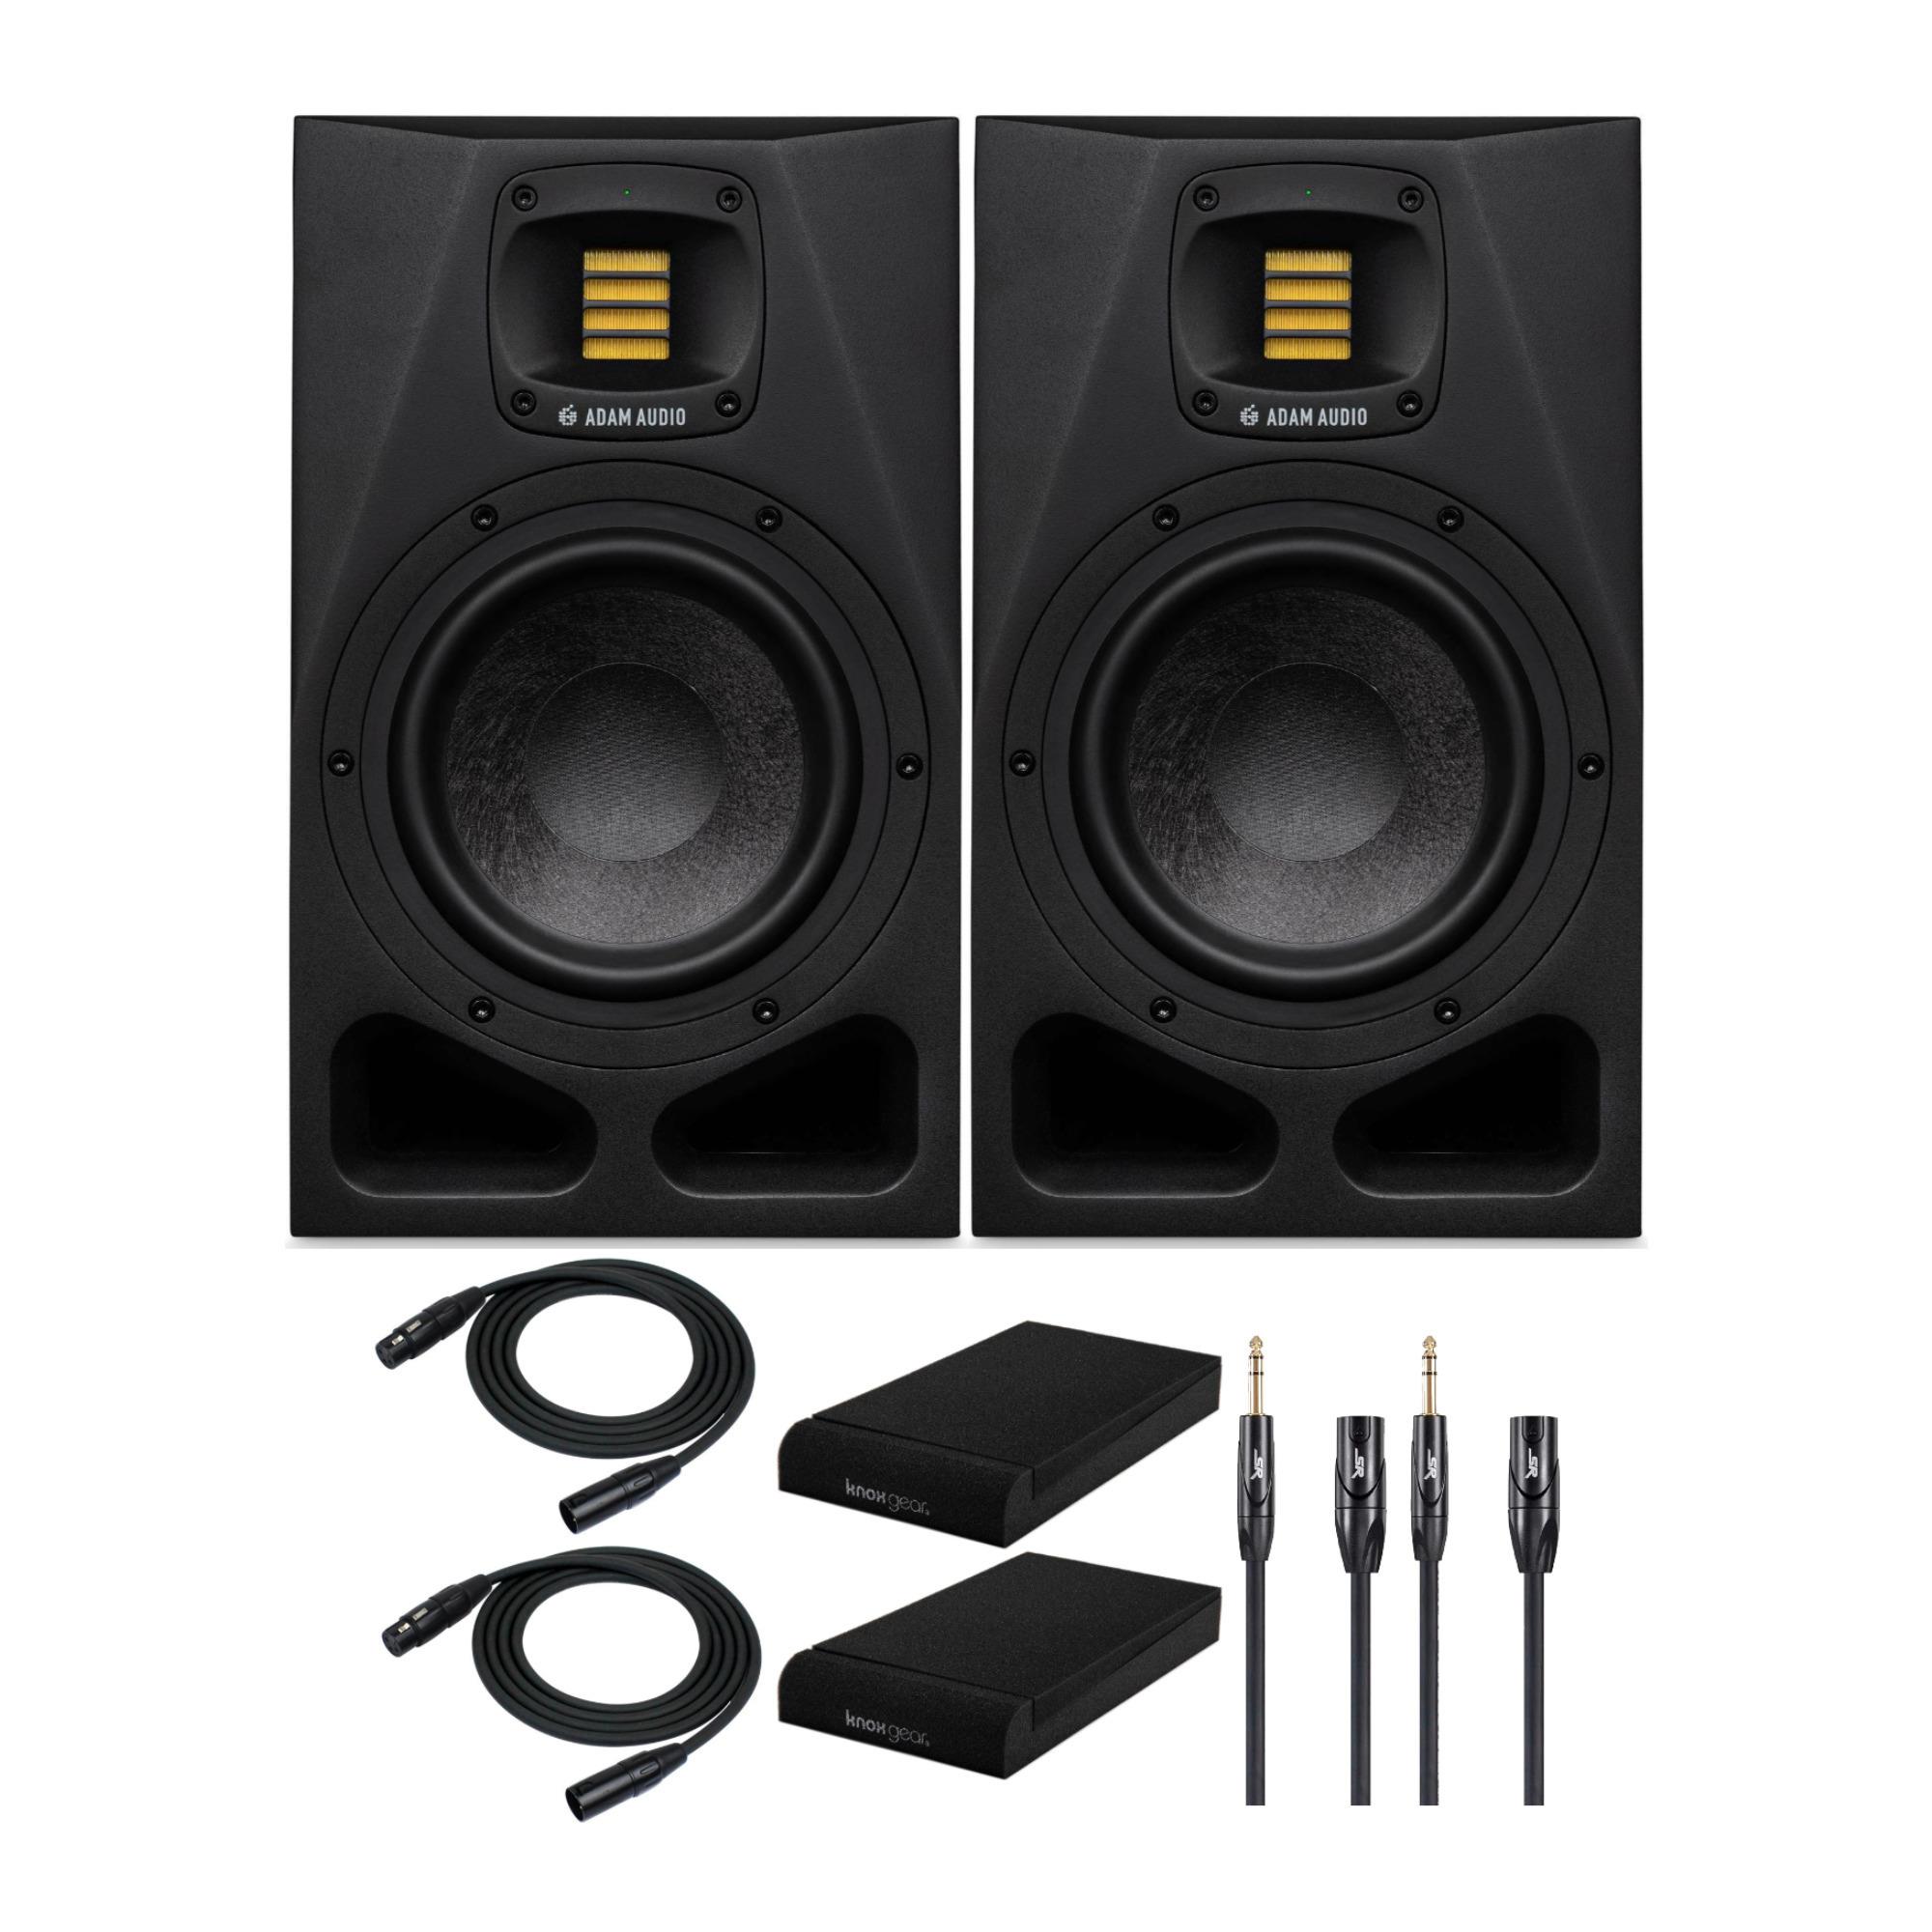 Adam Audio A4V Powered Two-Way Studio Monitor (2-Pack) Bundle - image 1 of 9